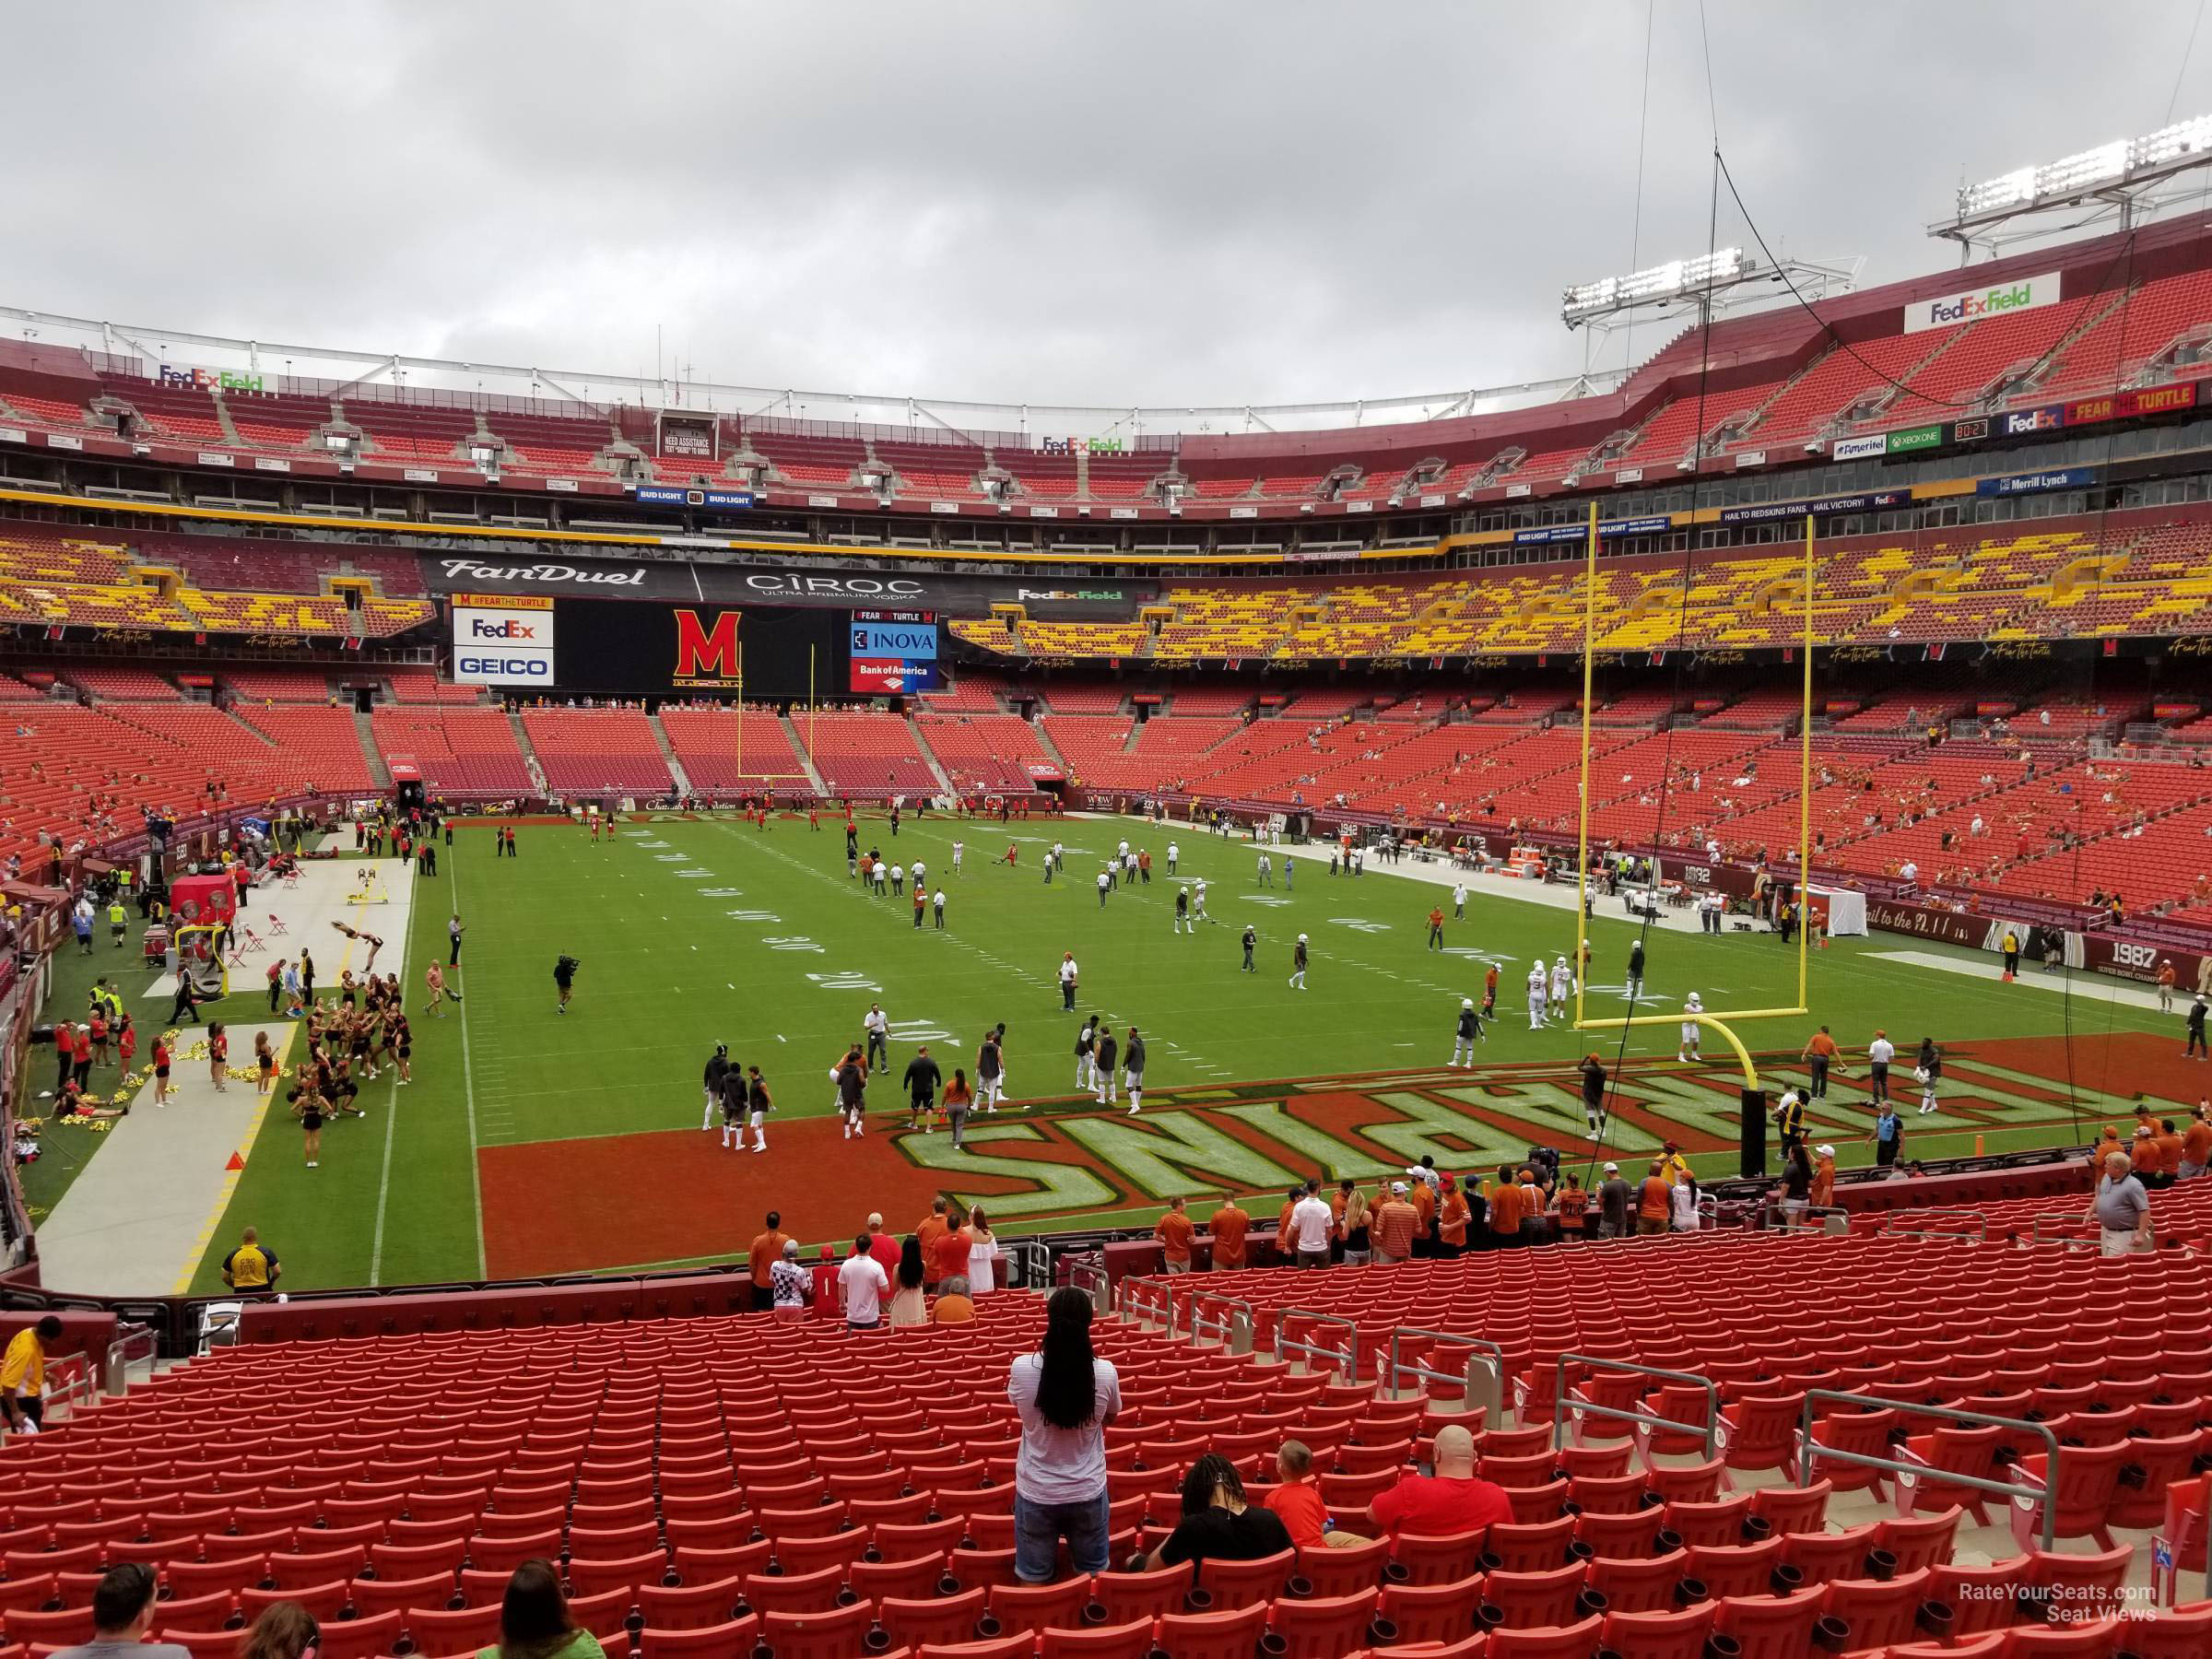 section 234, row 1 seat view  - fedexfield